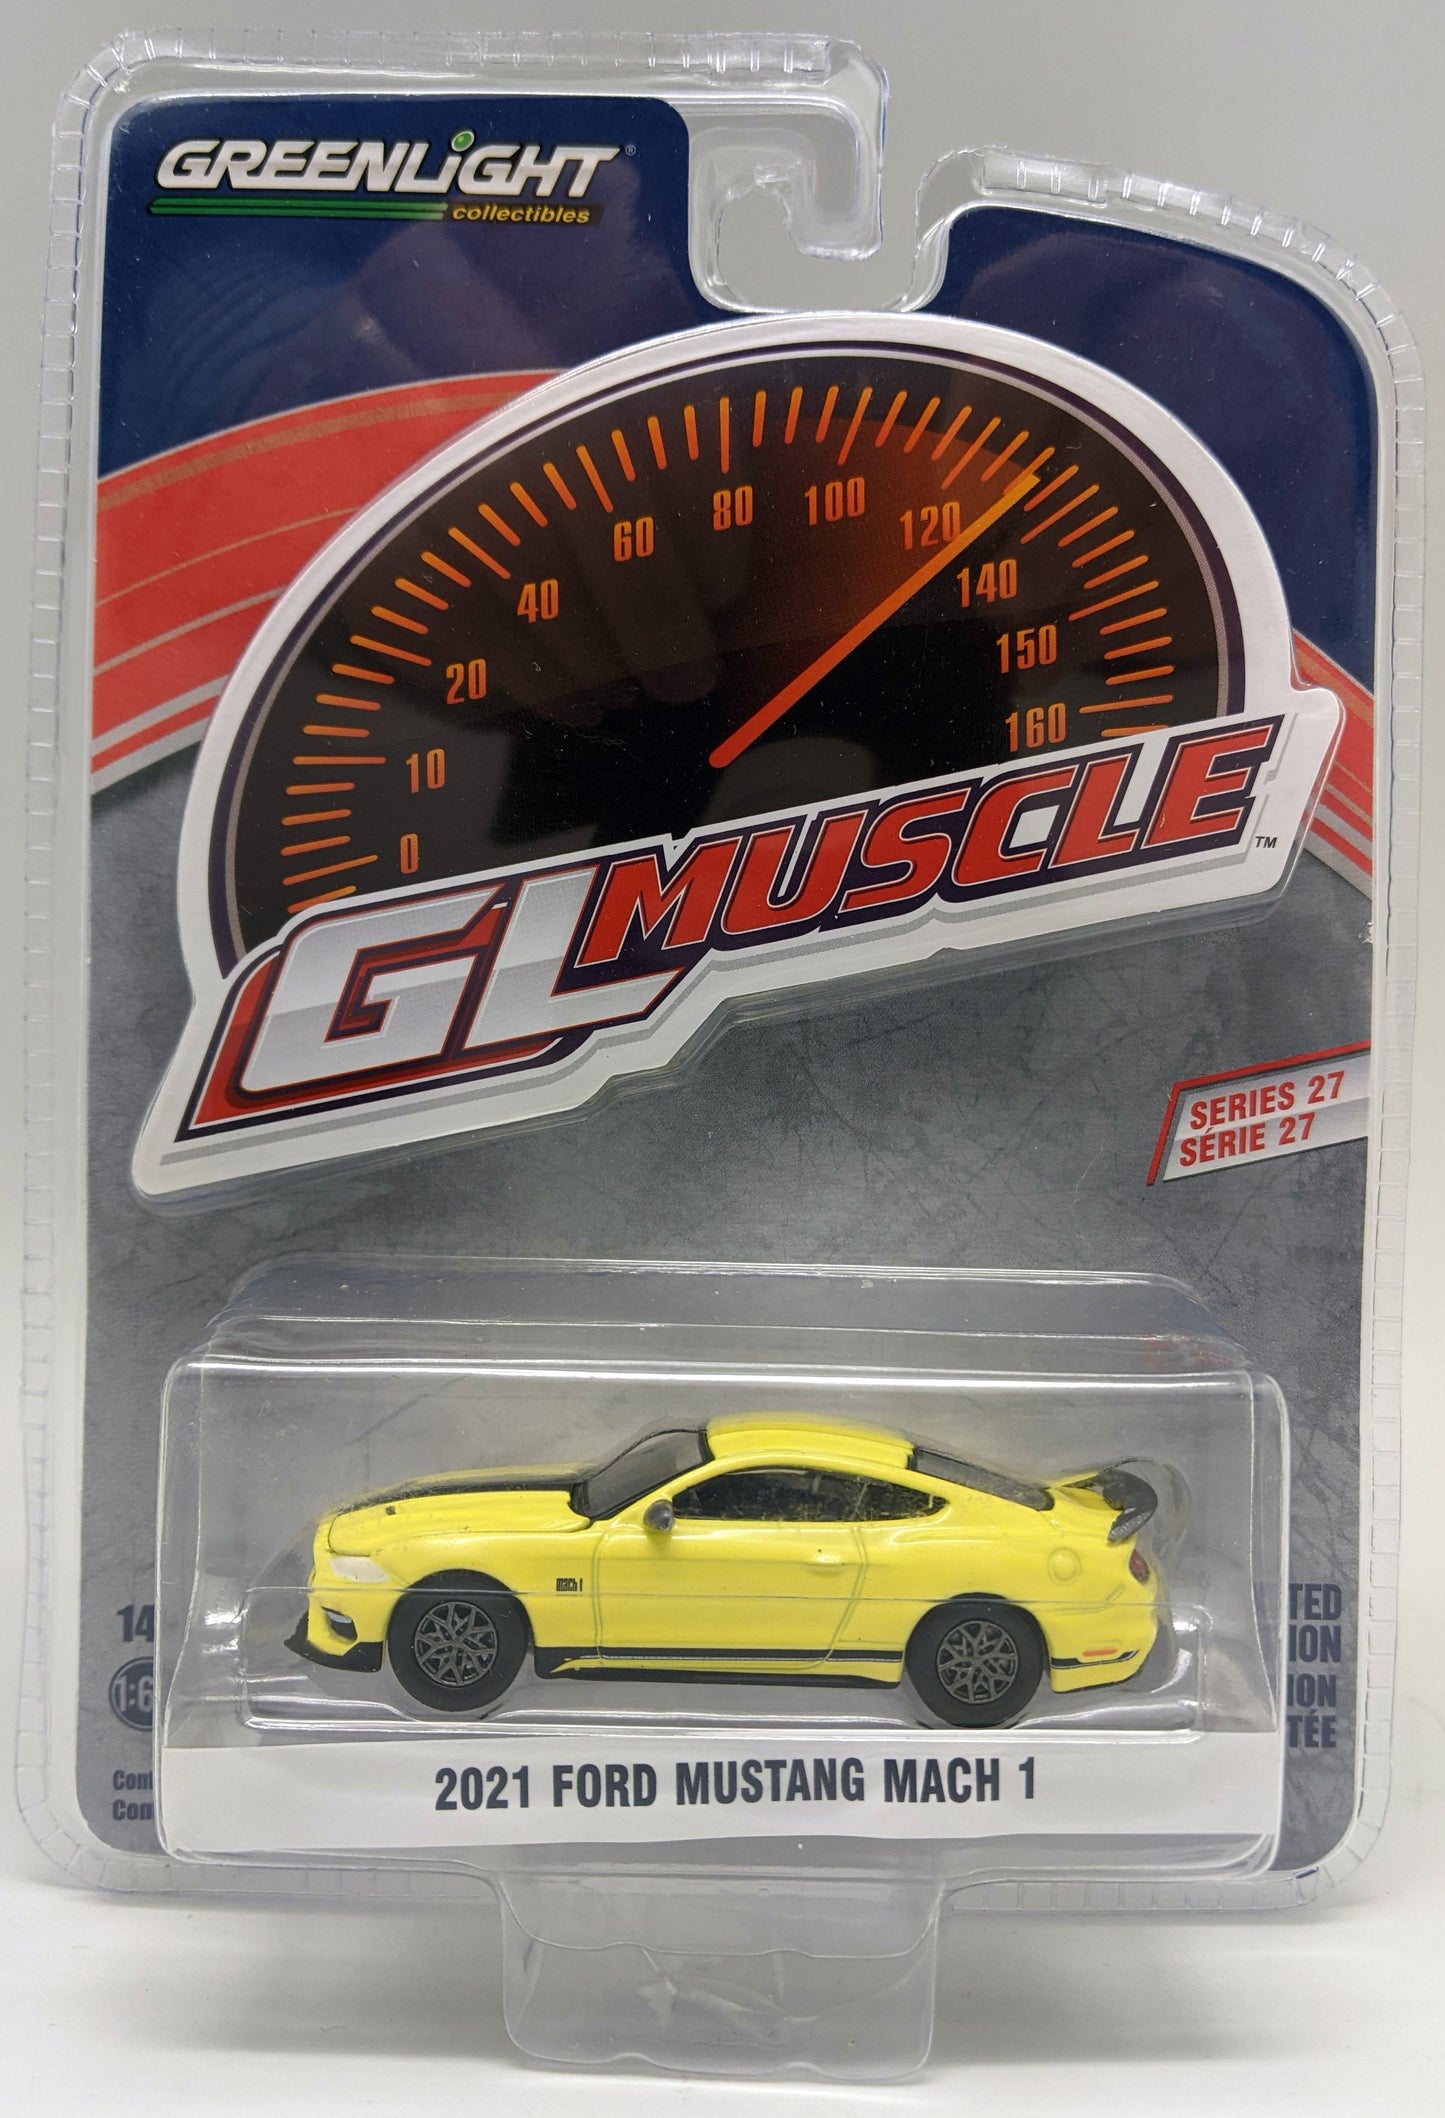 GL - 2021 Ford Mustang Mach 1